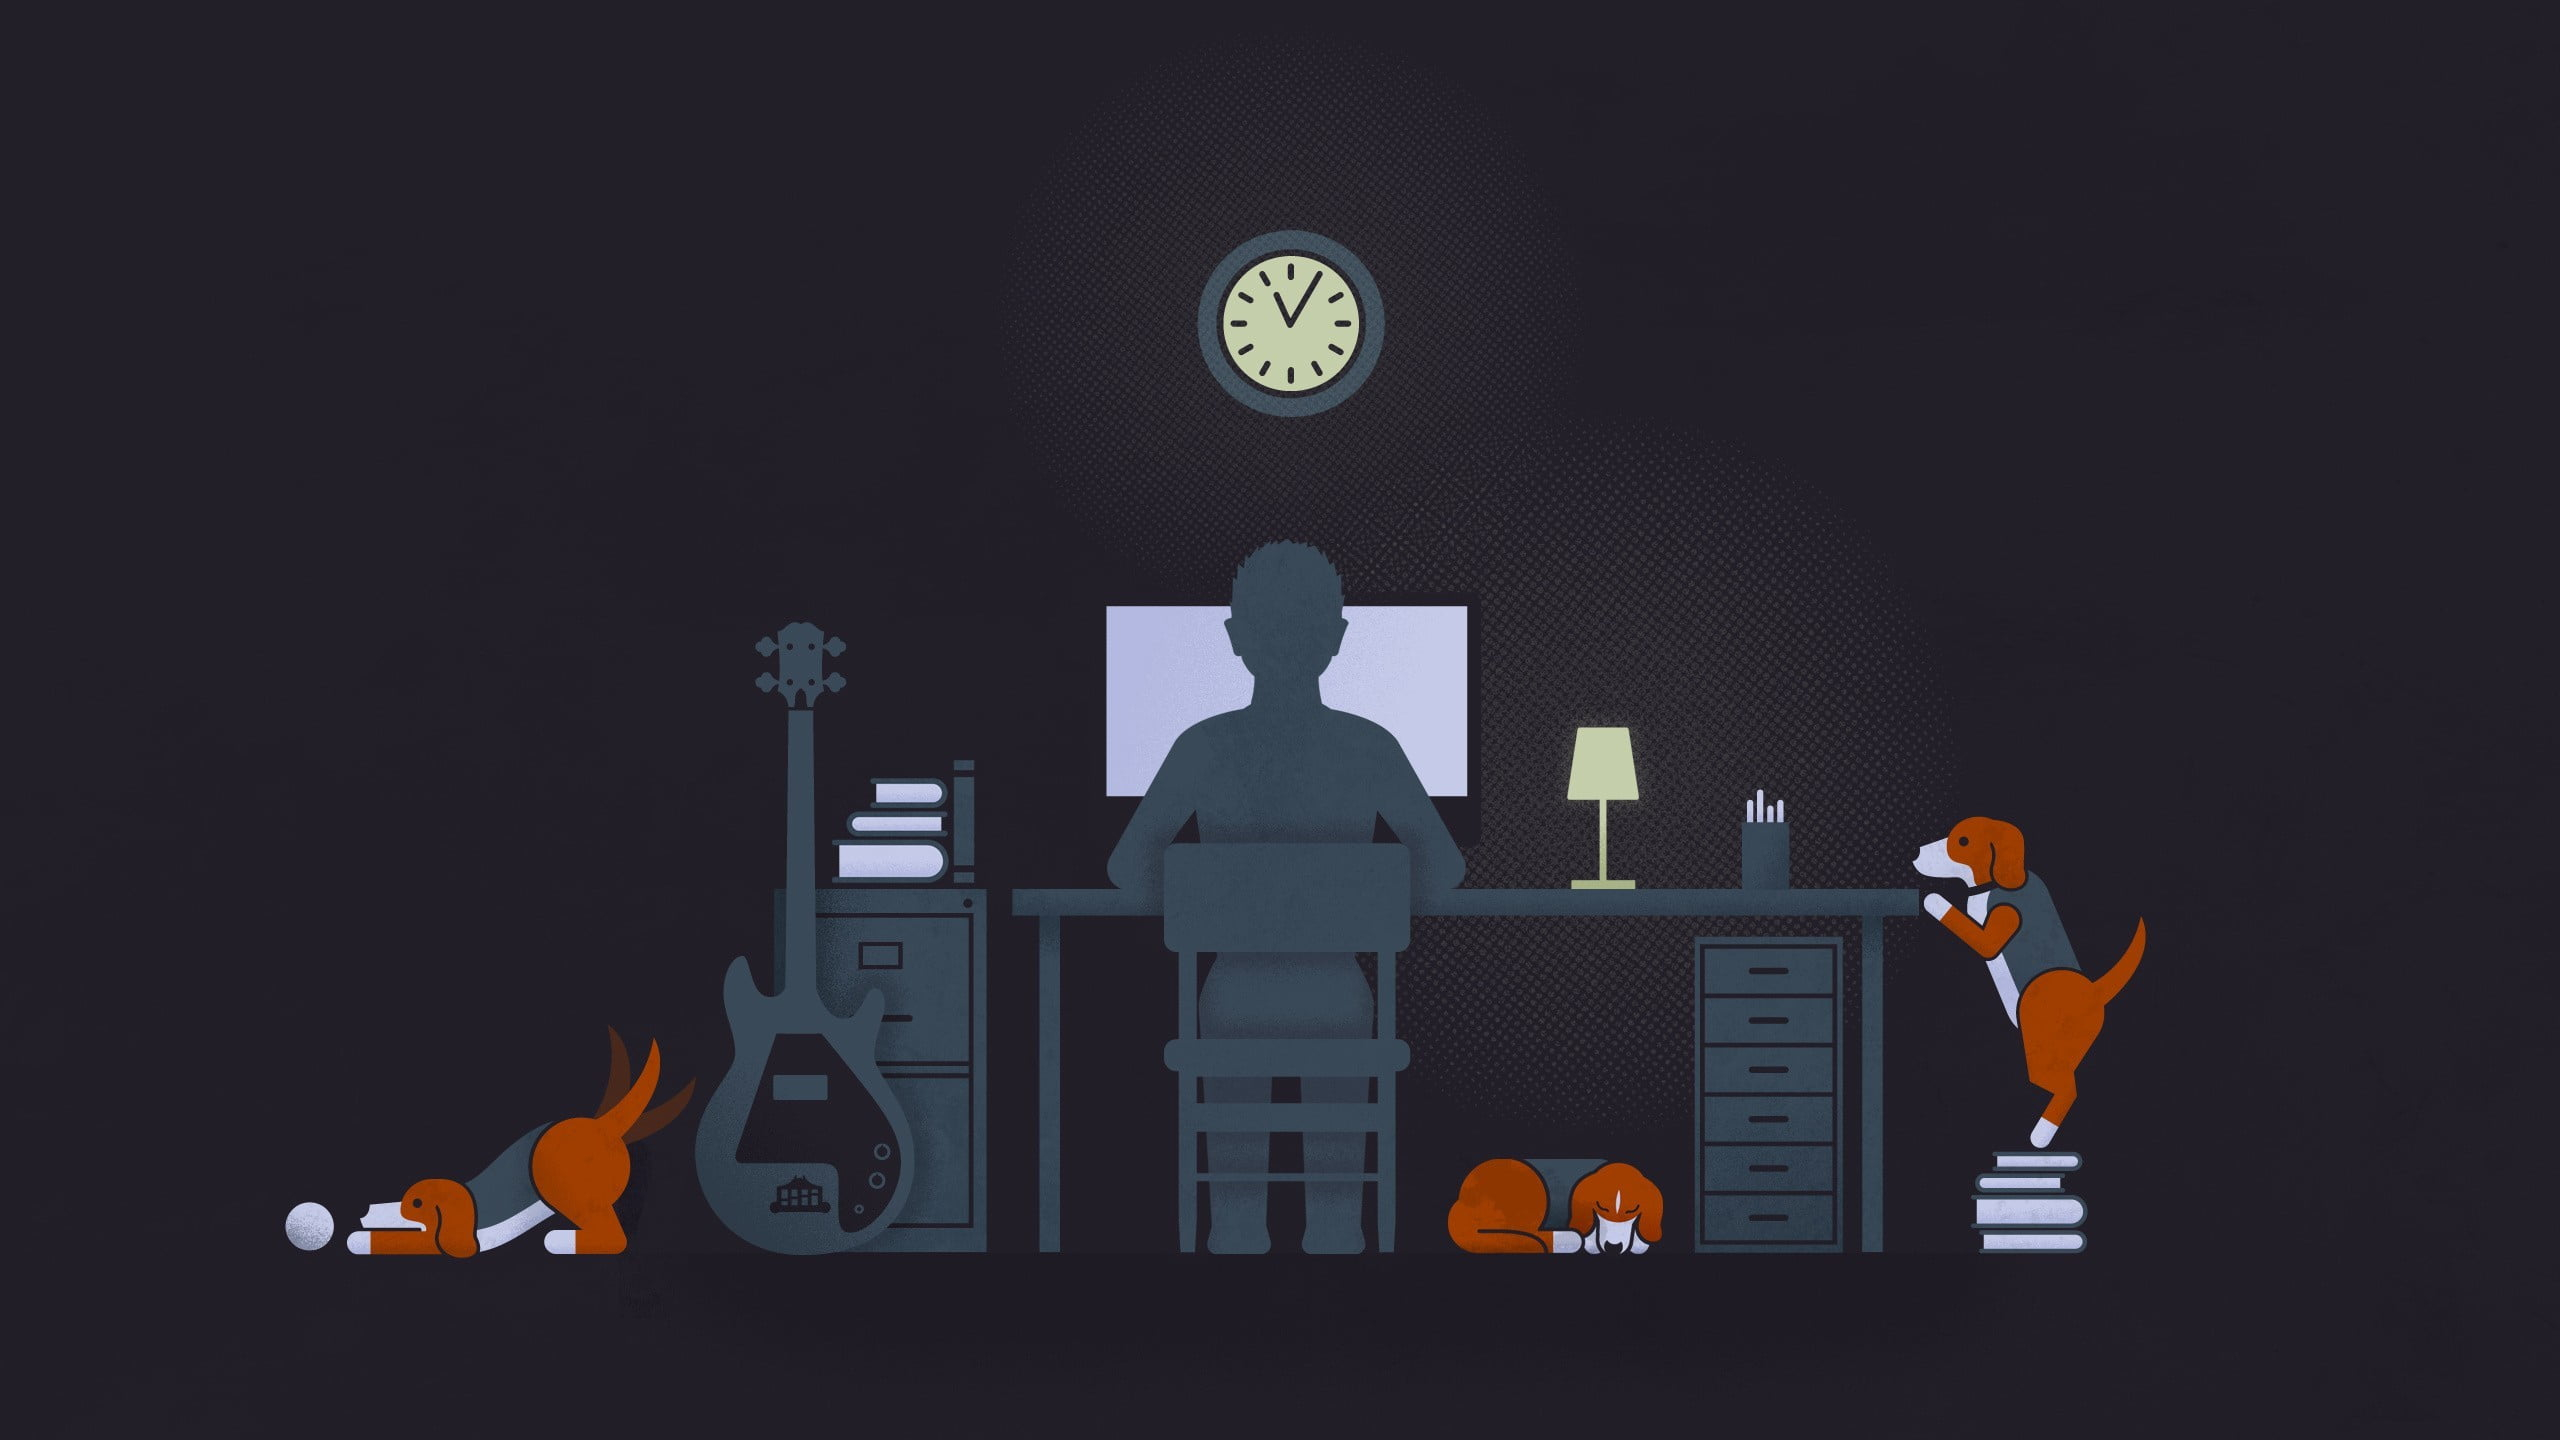 Person sitting on computer desk with three beagles illustration, illustration of person infront of computer near guitar and three puppies